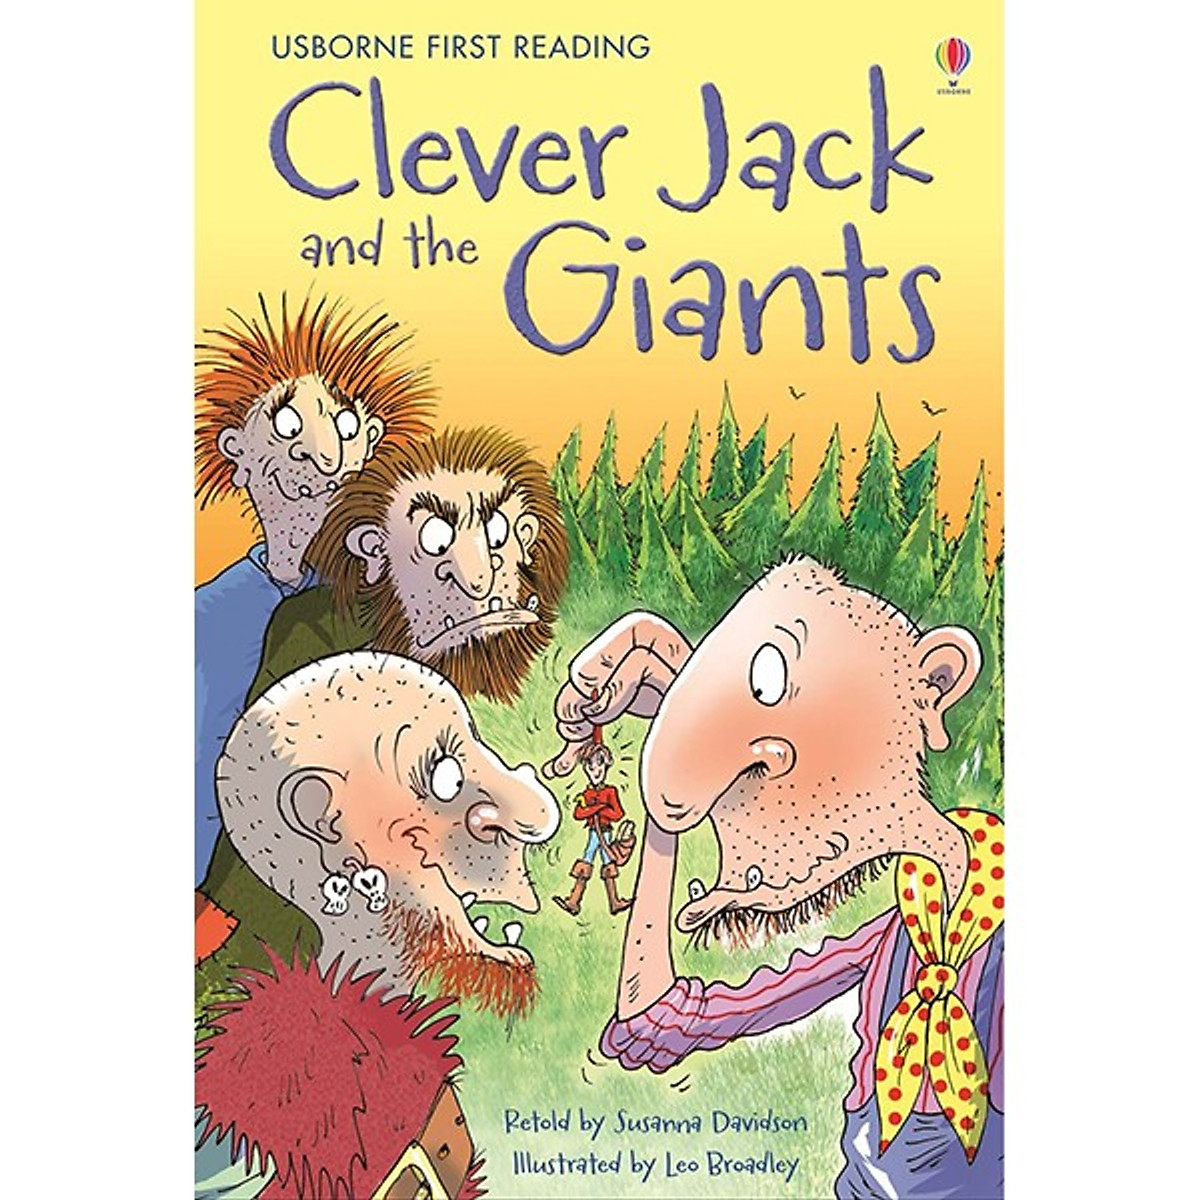 Usborne First Reading Level Four: Clever Jack and the Giants